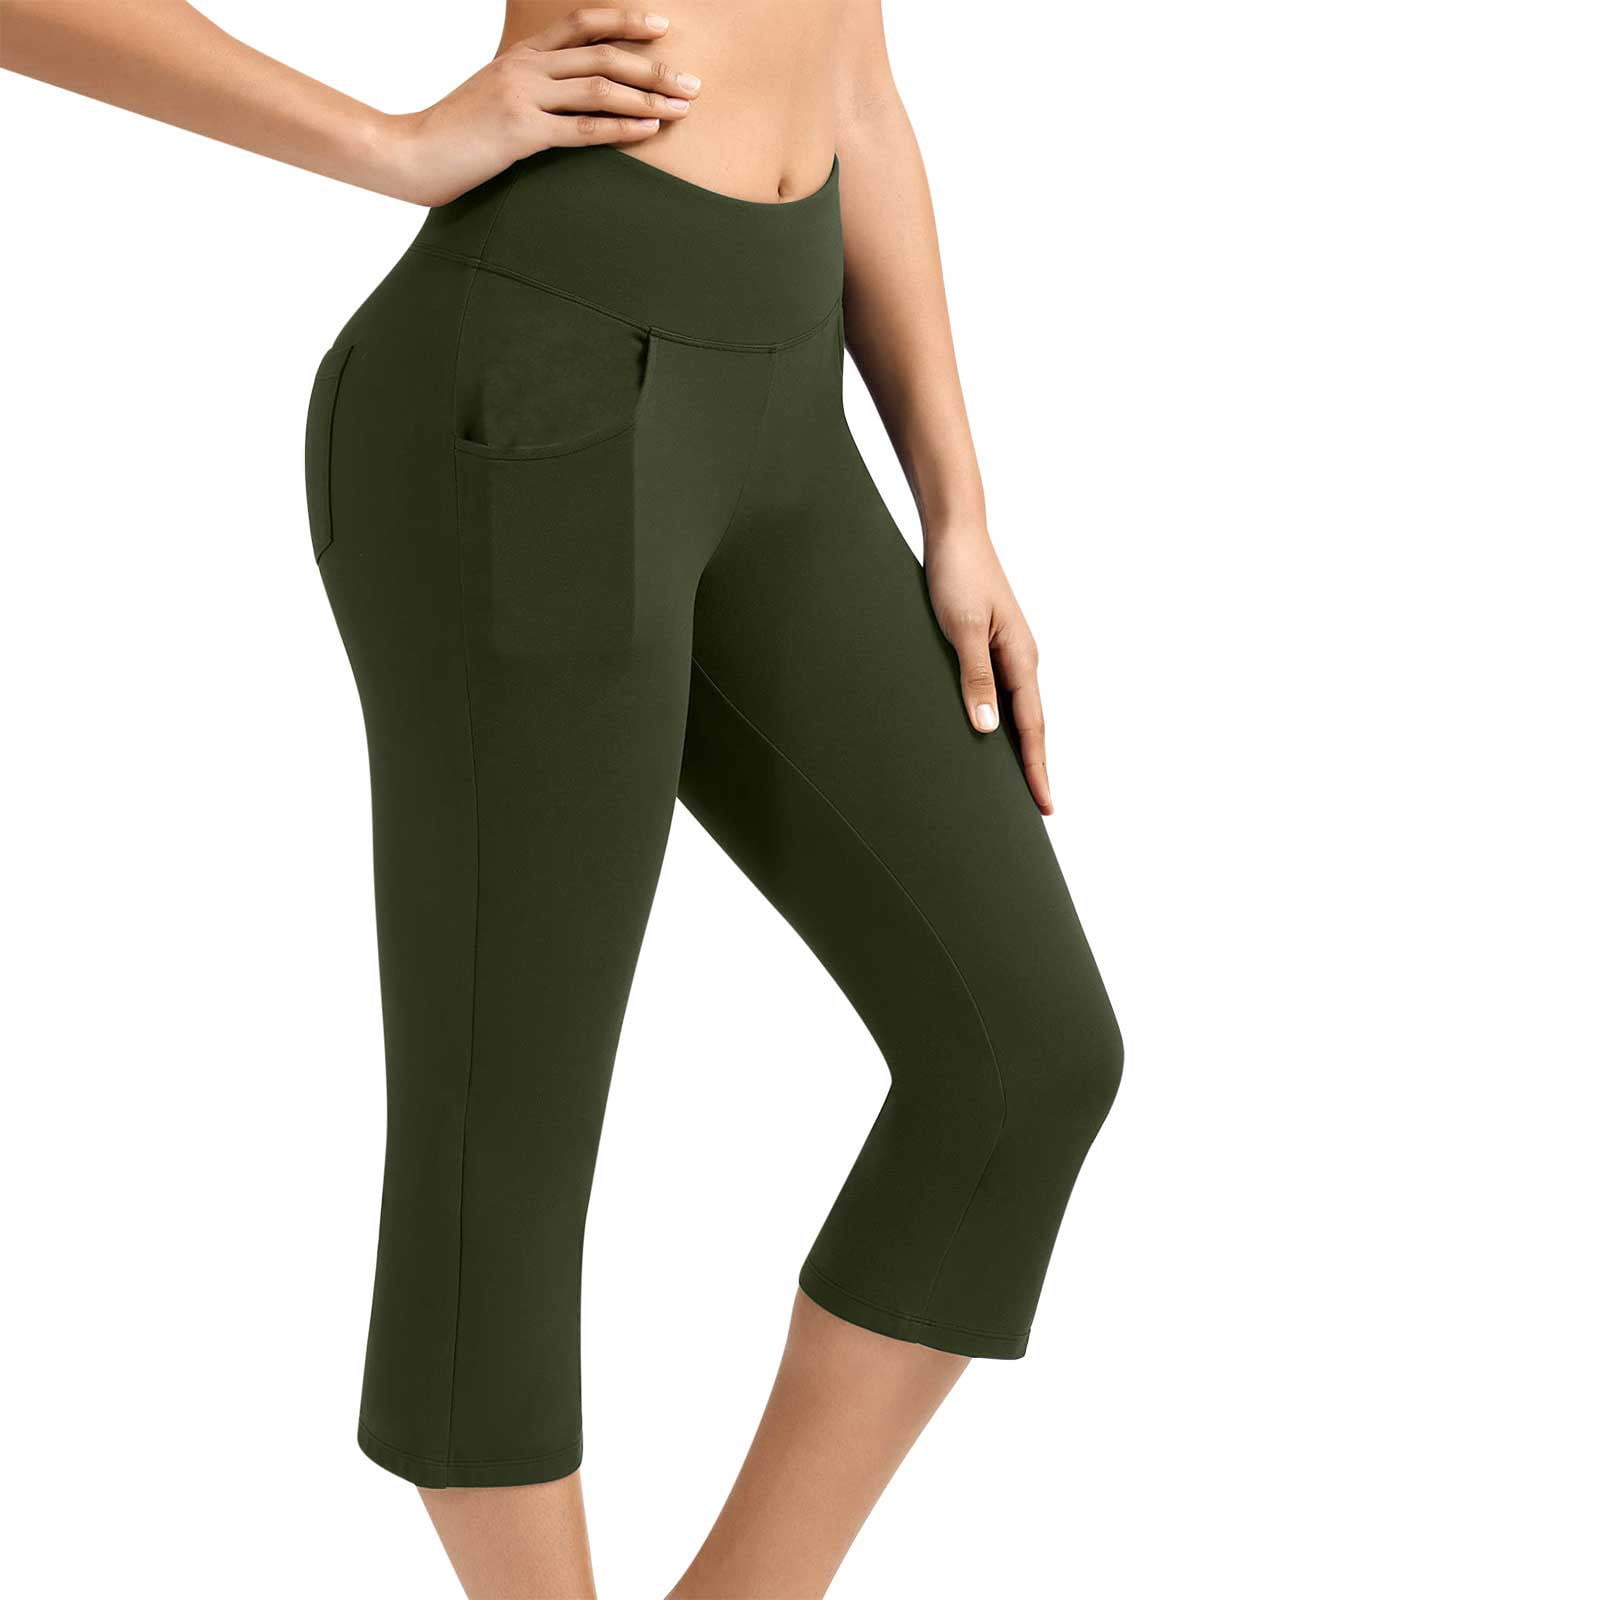 SELONE Plus Size Leggings for Women Capris With Pockets High Waist